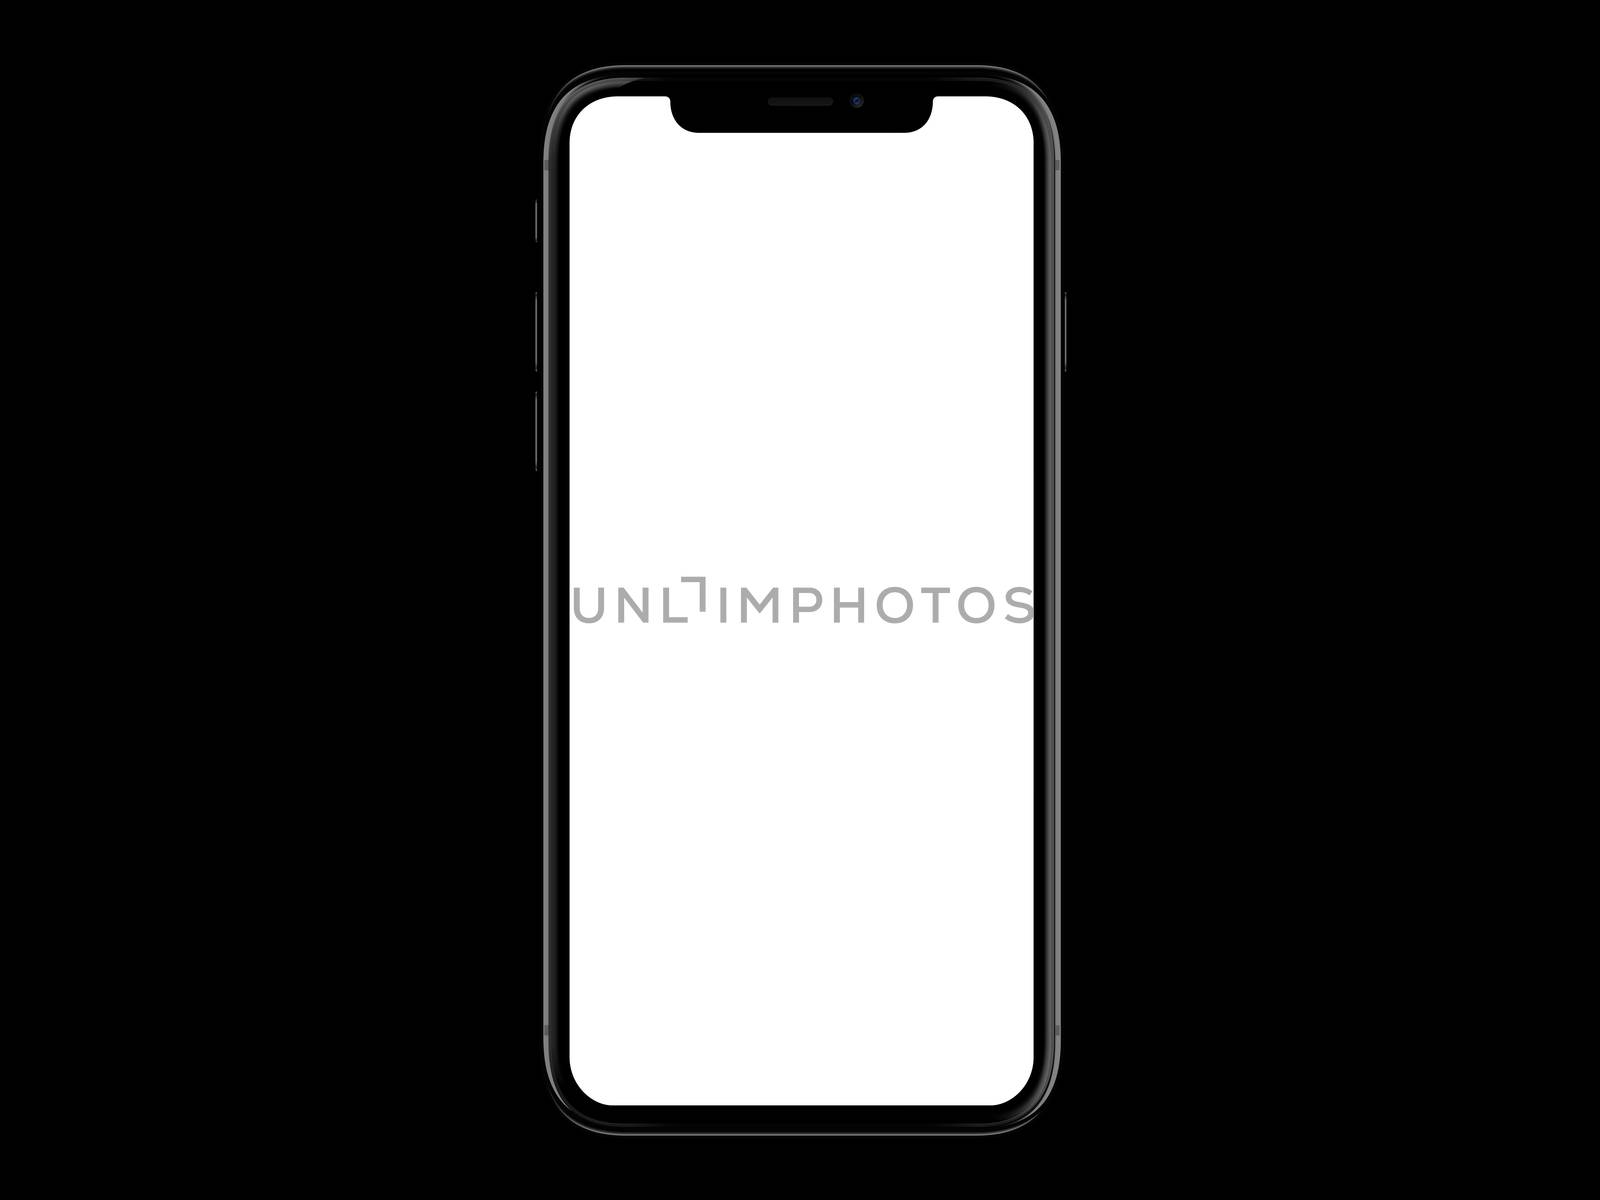 isolated black smart phone device mockup template with blank screen